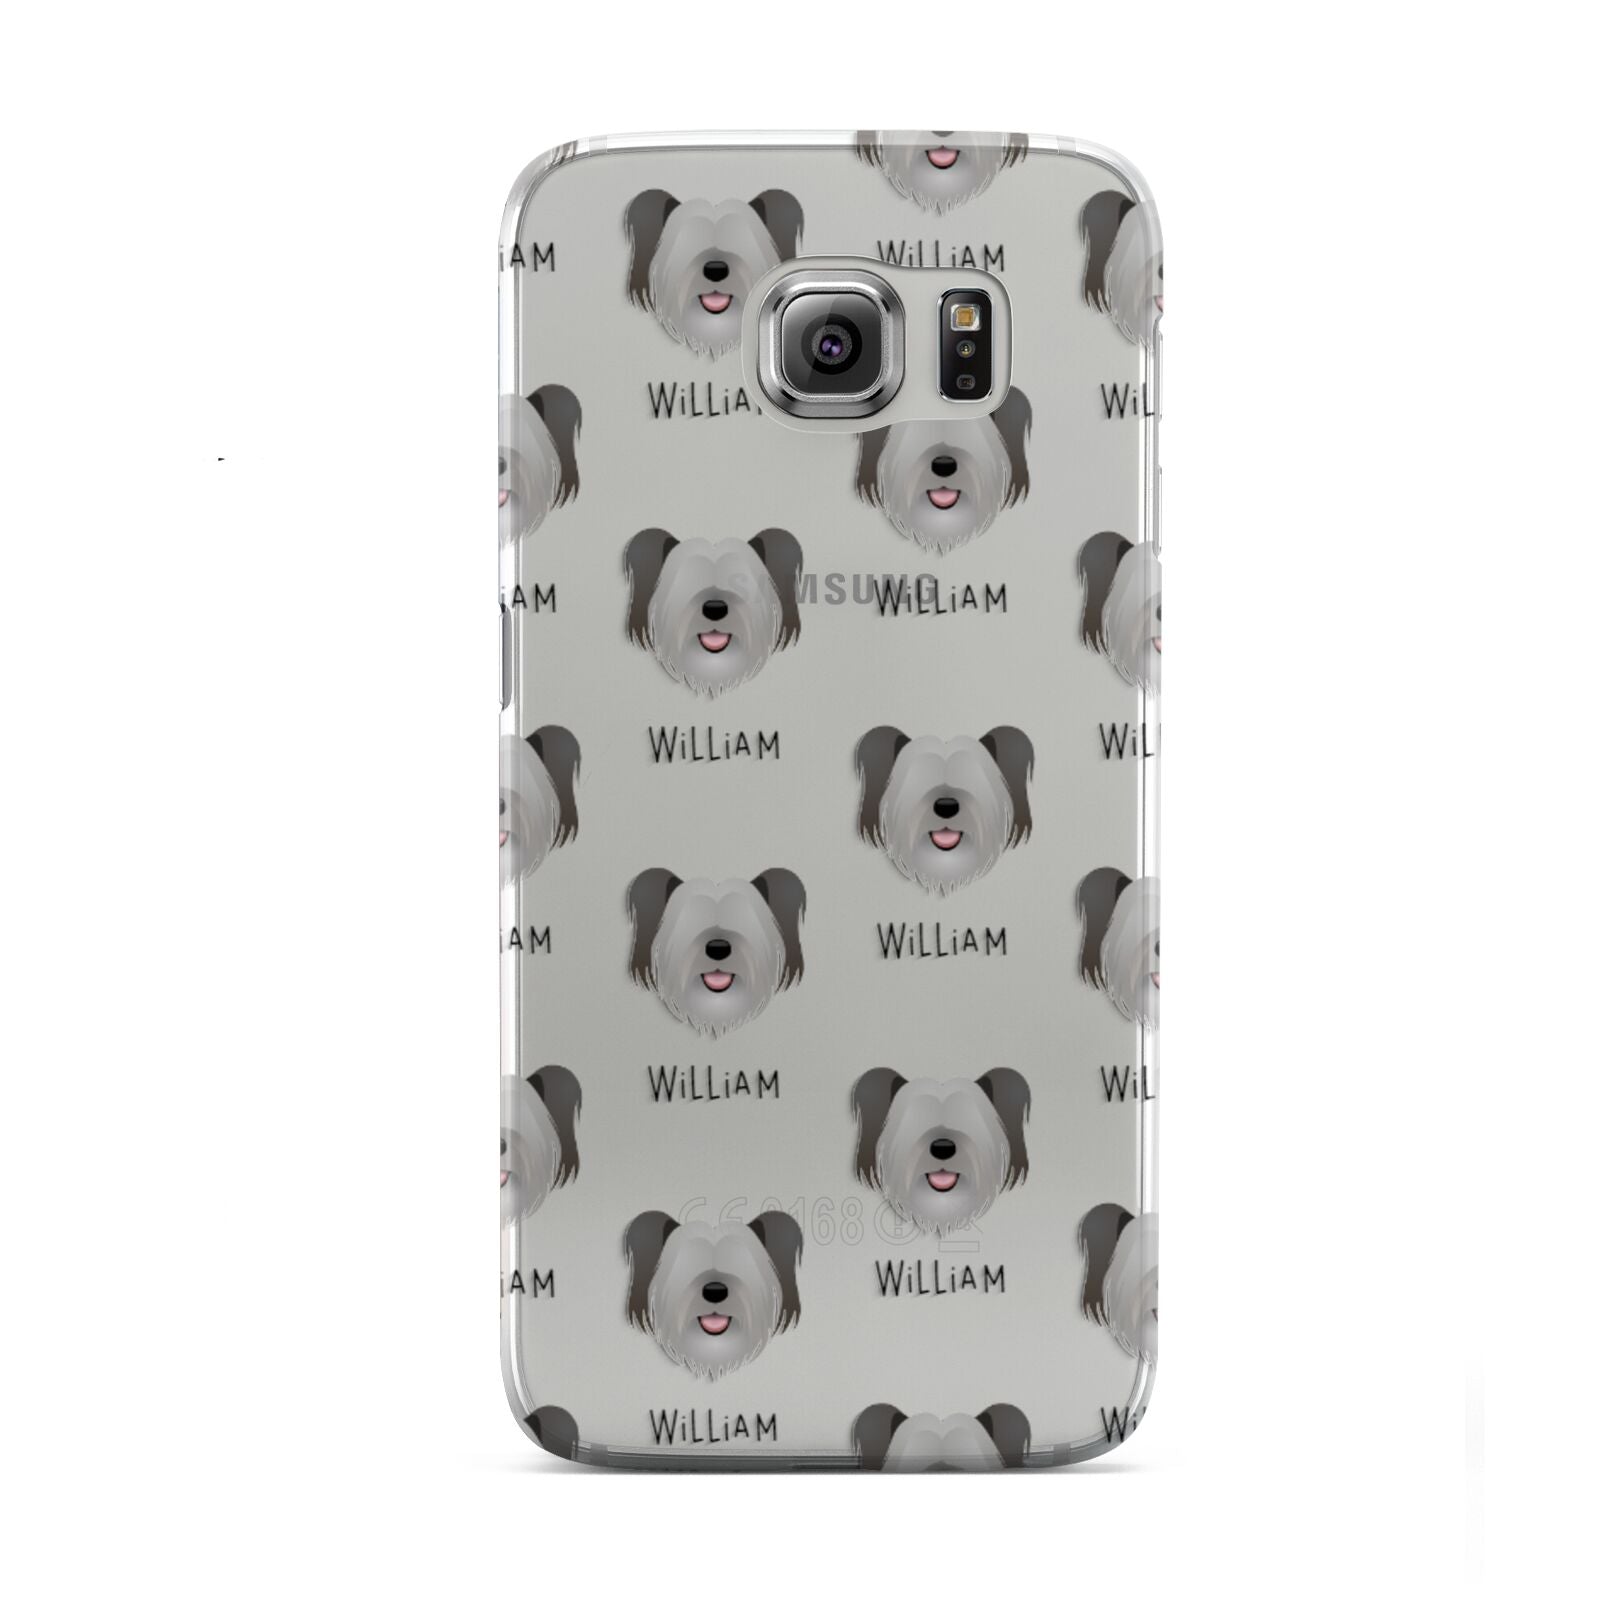 Skye Terrier Icon with Name Samsung Galaxy S6 Case